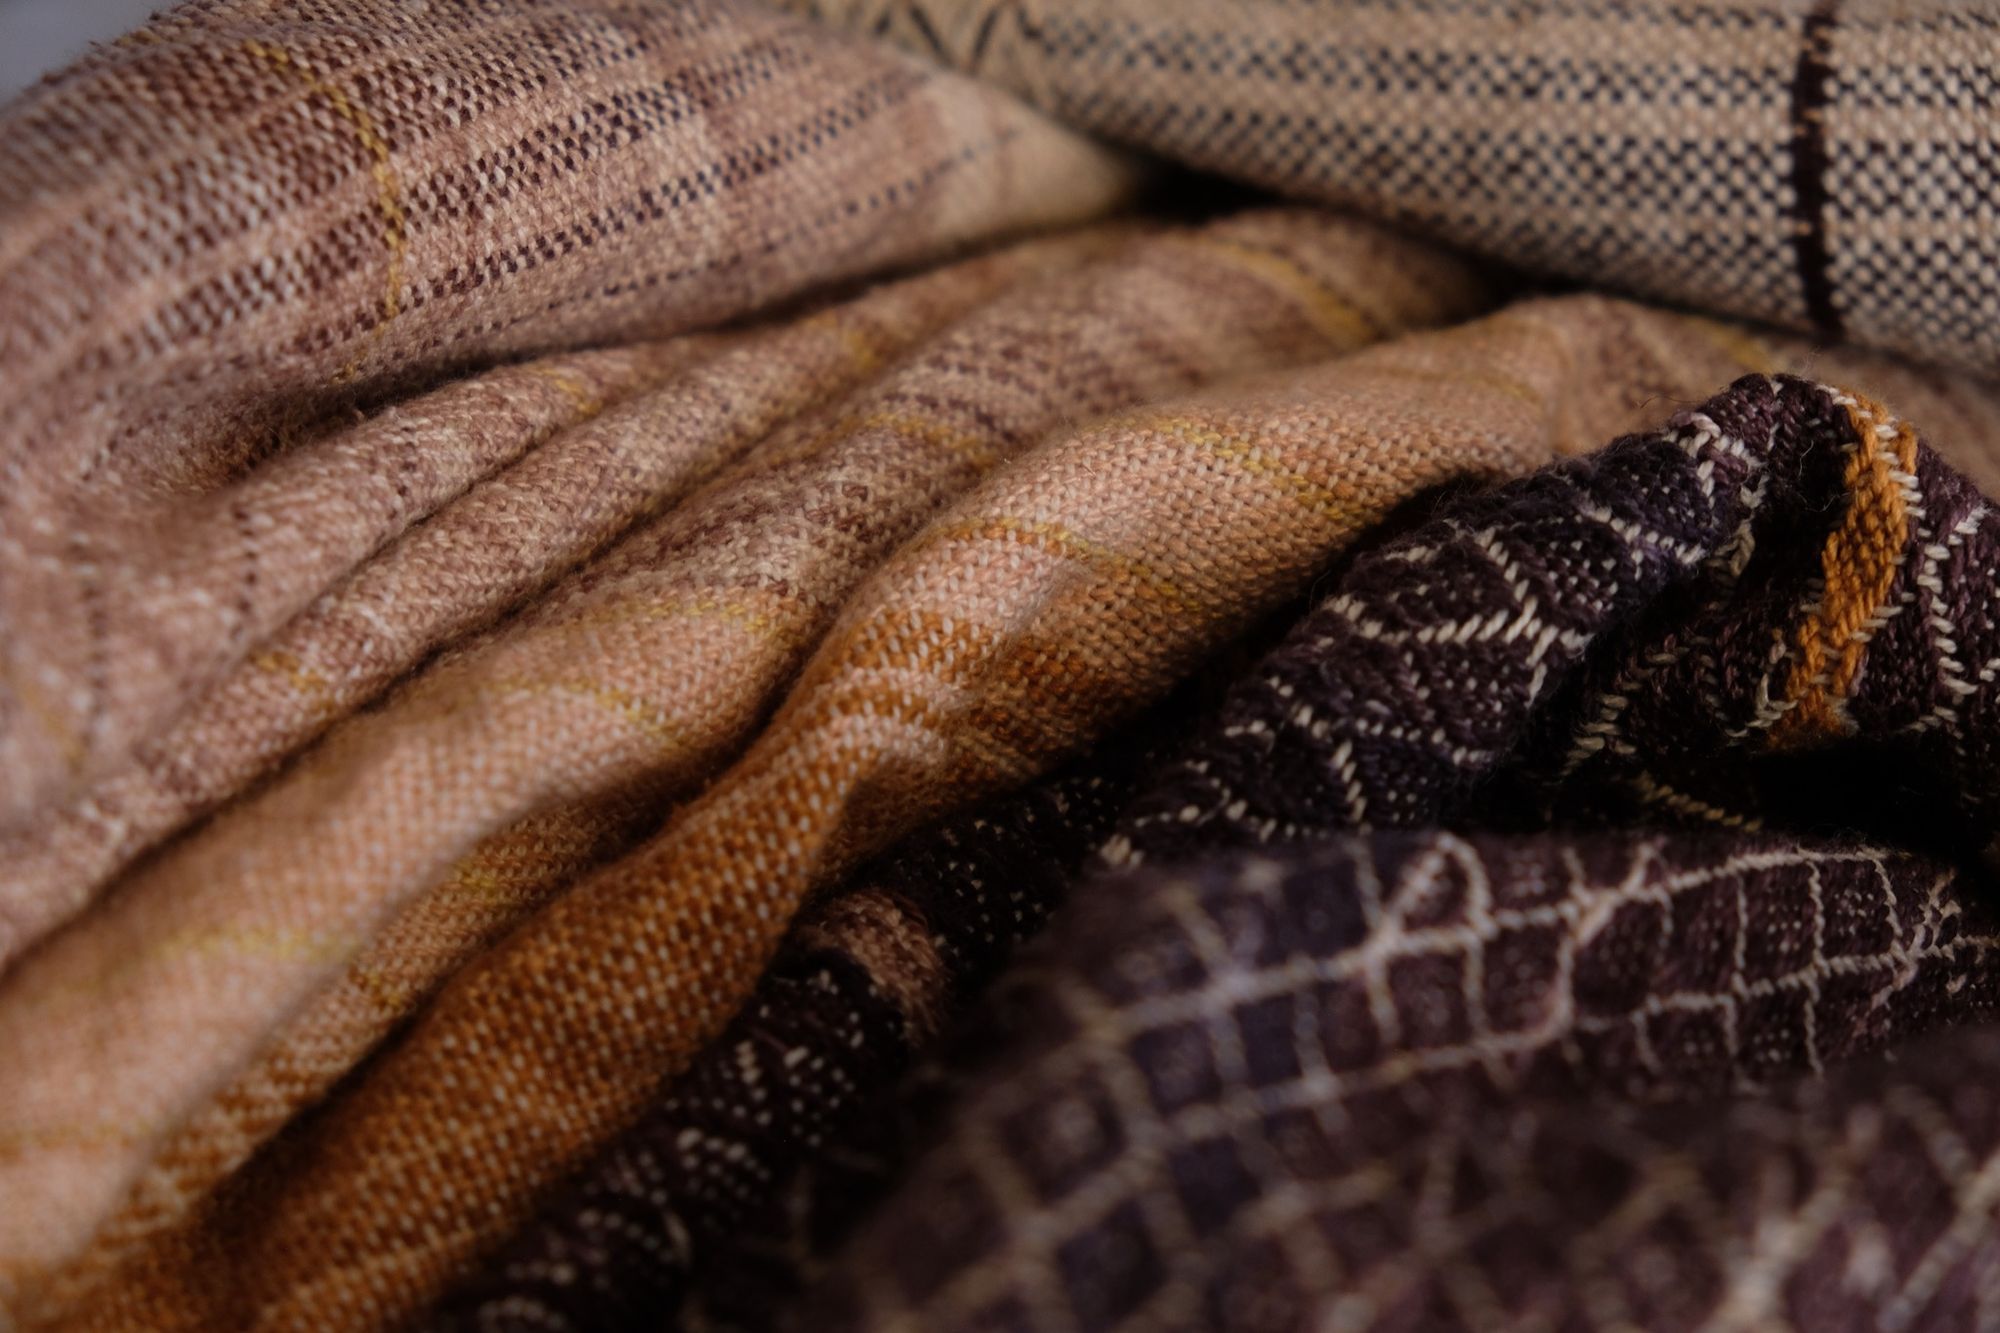 handwoven fabric with plain and diamond pattern in grey, brick reds, black, blue, golden yellows, white and pink